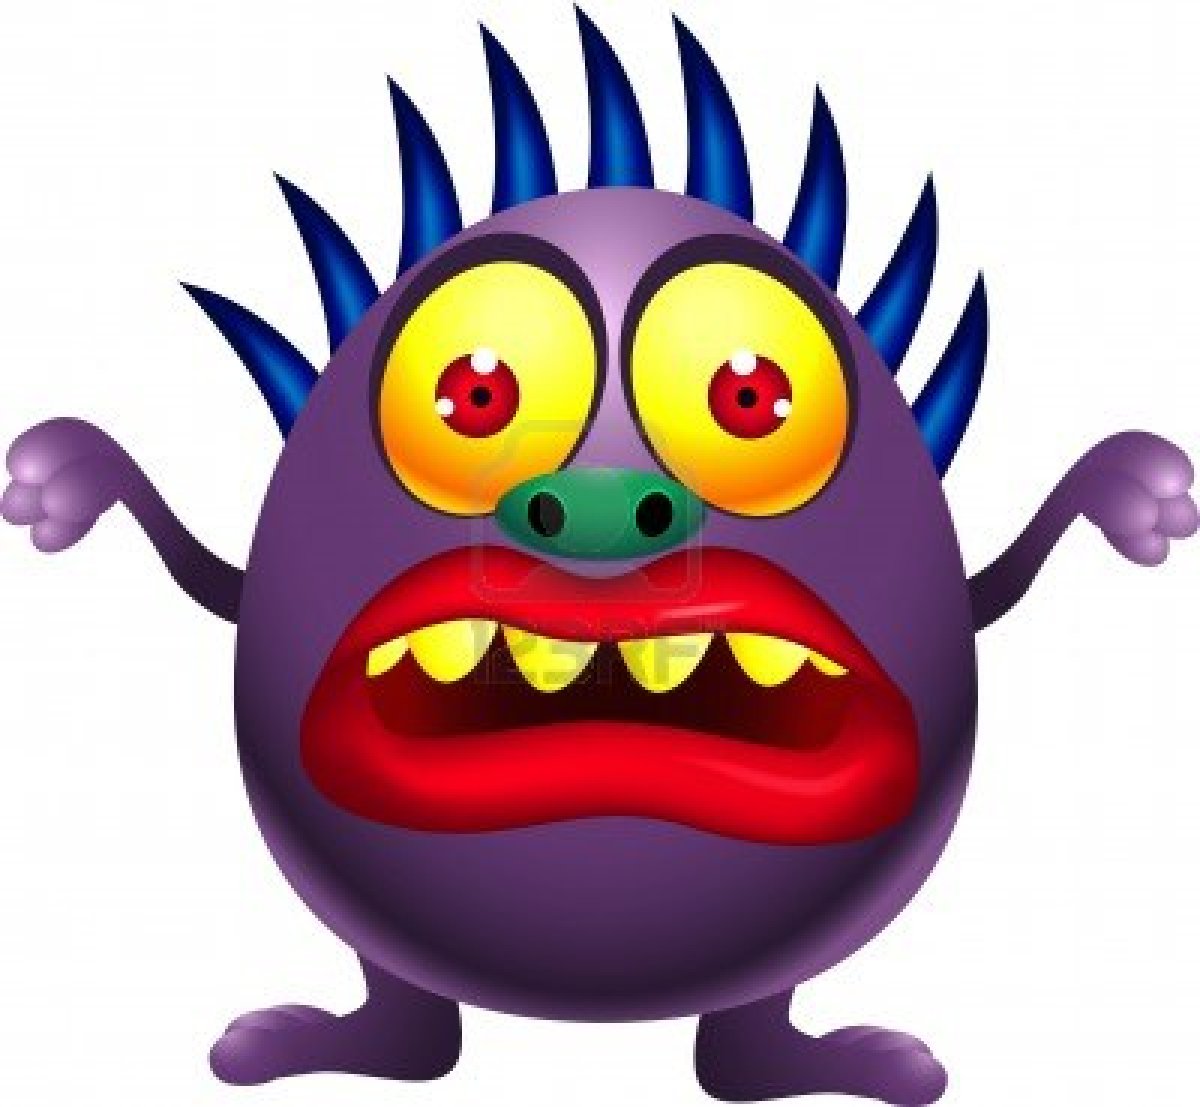 Cartoon Scary Monster Images & Pictures - Becuo